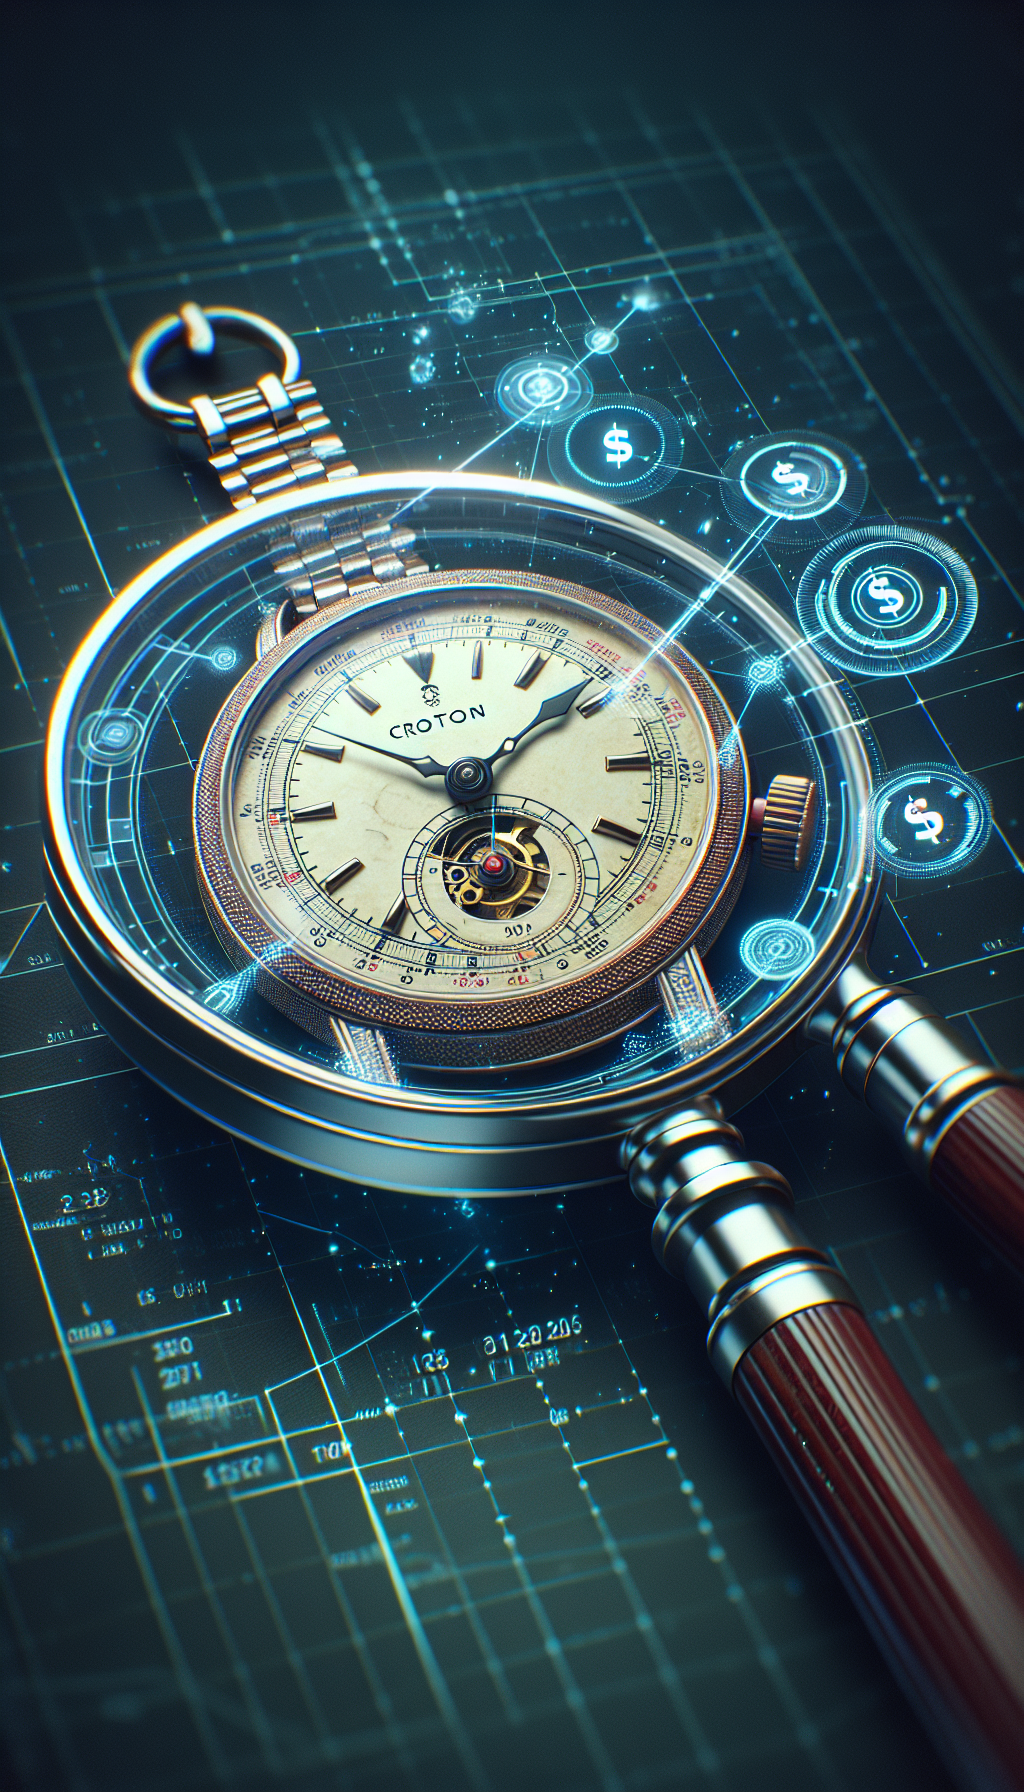 An illustration depicting a magnifying glass scrutinizing a classic Croton watch, with key factors like rarity, condition, and historical significance floating like holographic data points around the piece. The watch's hands are replaced by tiny dollar signs, suggesting its value, while subtle wear and patina on the watch's face hint at vintage authenticity. The styles blend photorealism with futuristic infographics.